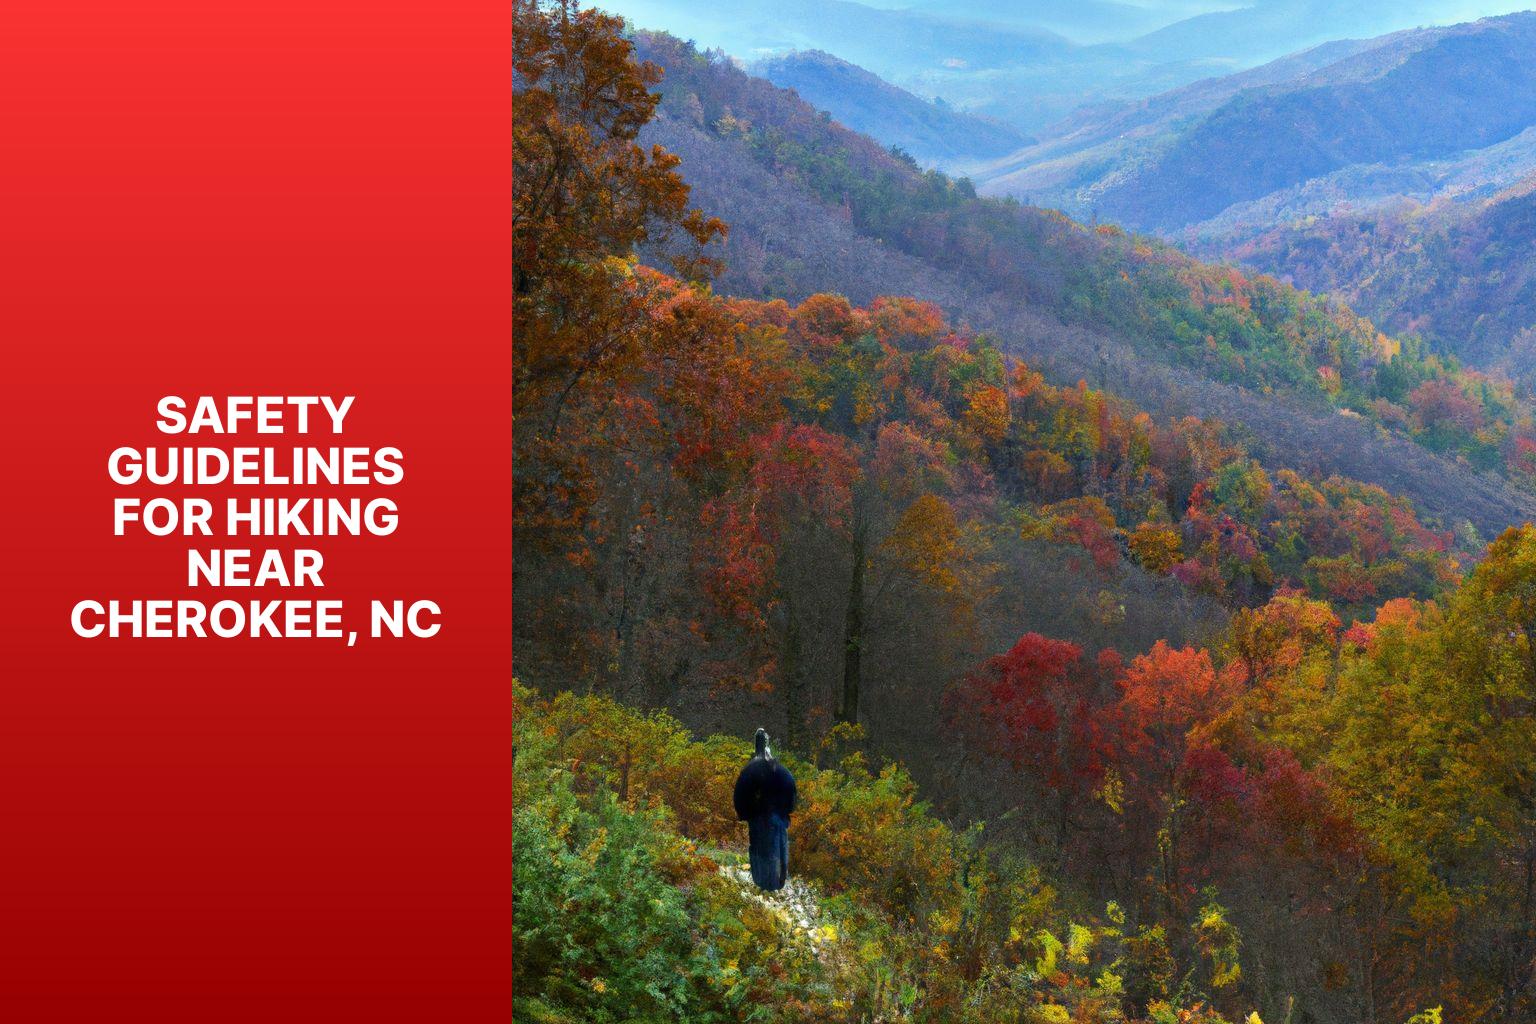 Safety Guidelines for Hiking Near Cherokee, NC - Hikes Near Cherokee Nc 